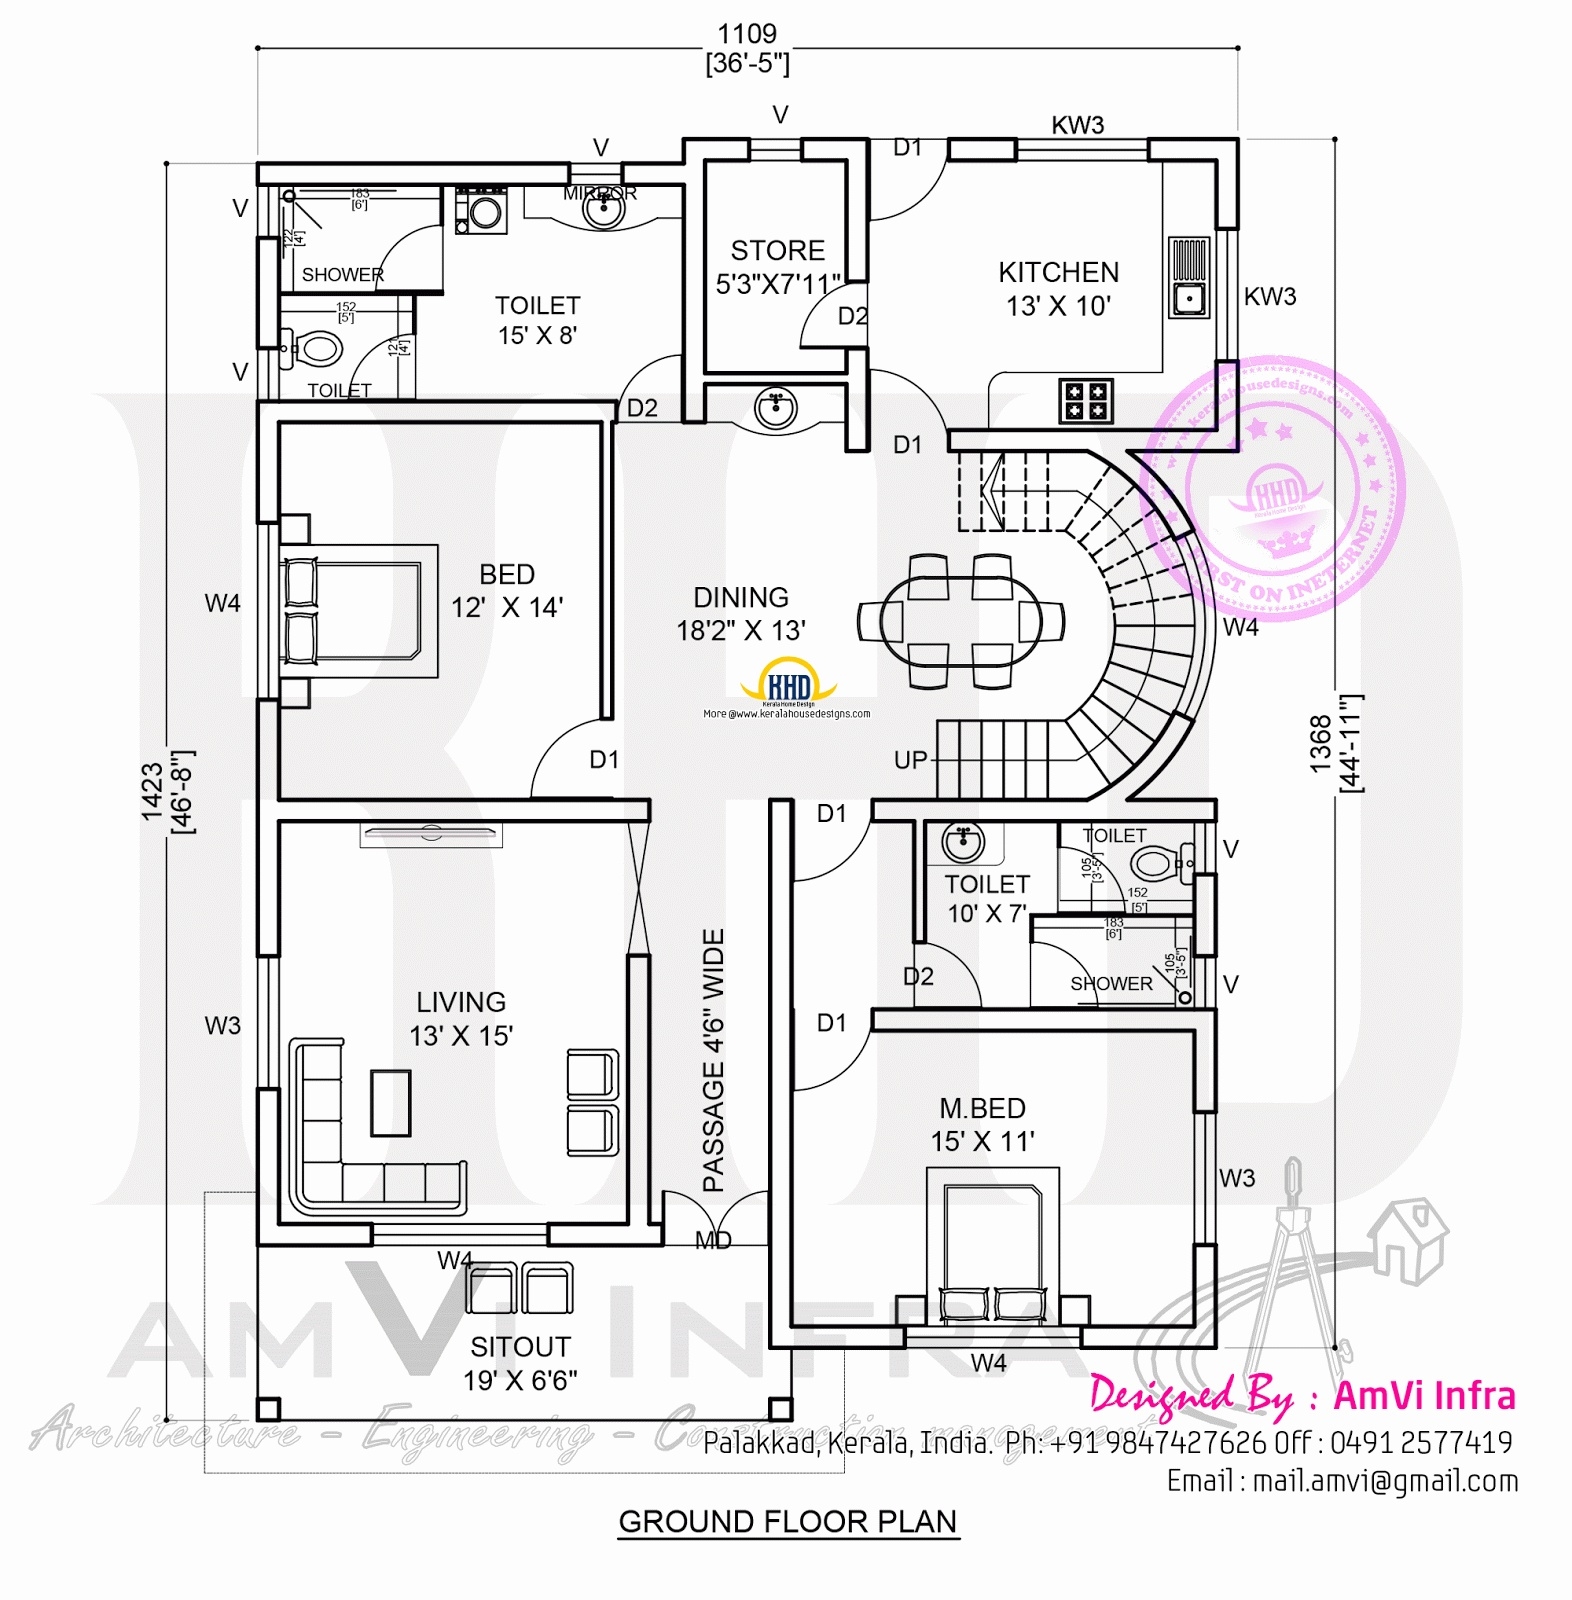 Good kerala home design floor plans bedroom contemporary house plans | #126823 for great kerala 3 bedroom home plans 3d